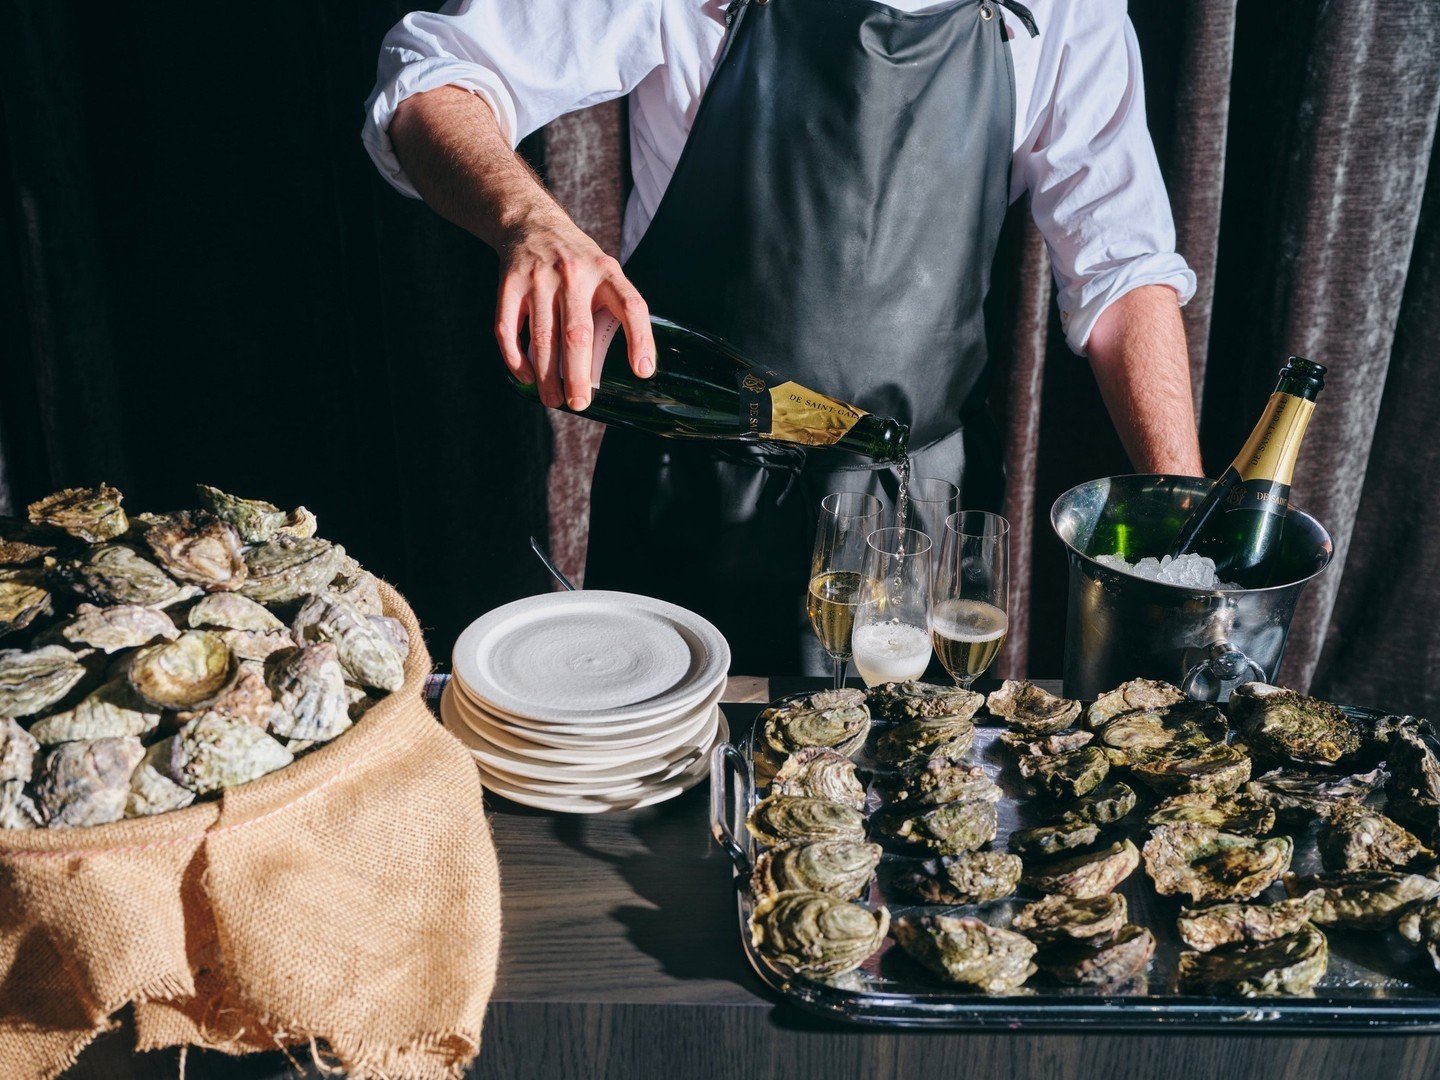 Experience unique options like Fresh oyster &amp; Champagne stations and frozen margarita bars with menus crafted by the talented teams from Omnia and Yūgen Dining at The Grand Room.